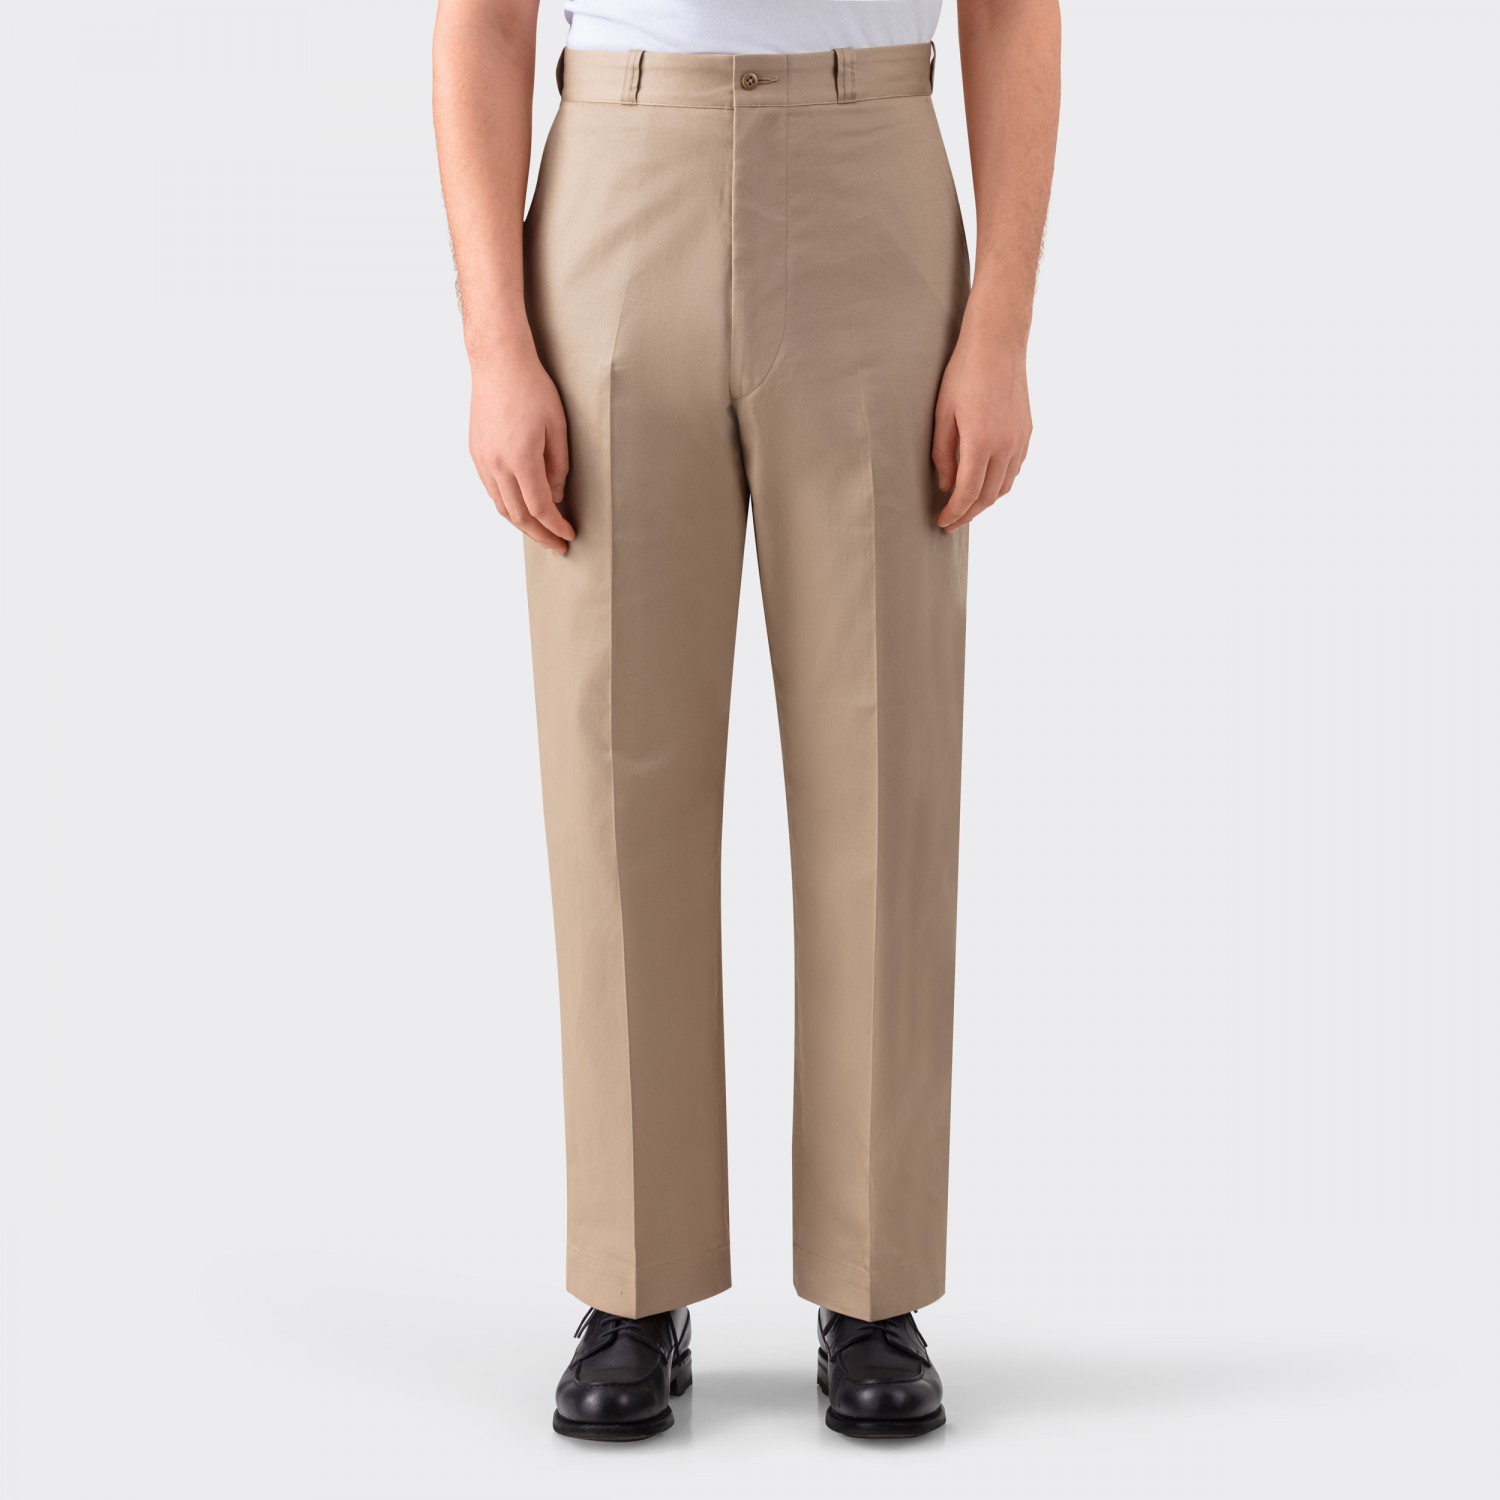 H&M Men Slim Fit Cotton Twill Trousers - Price History